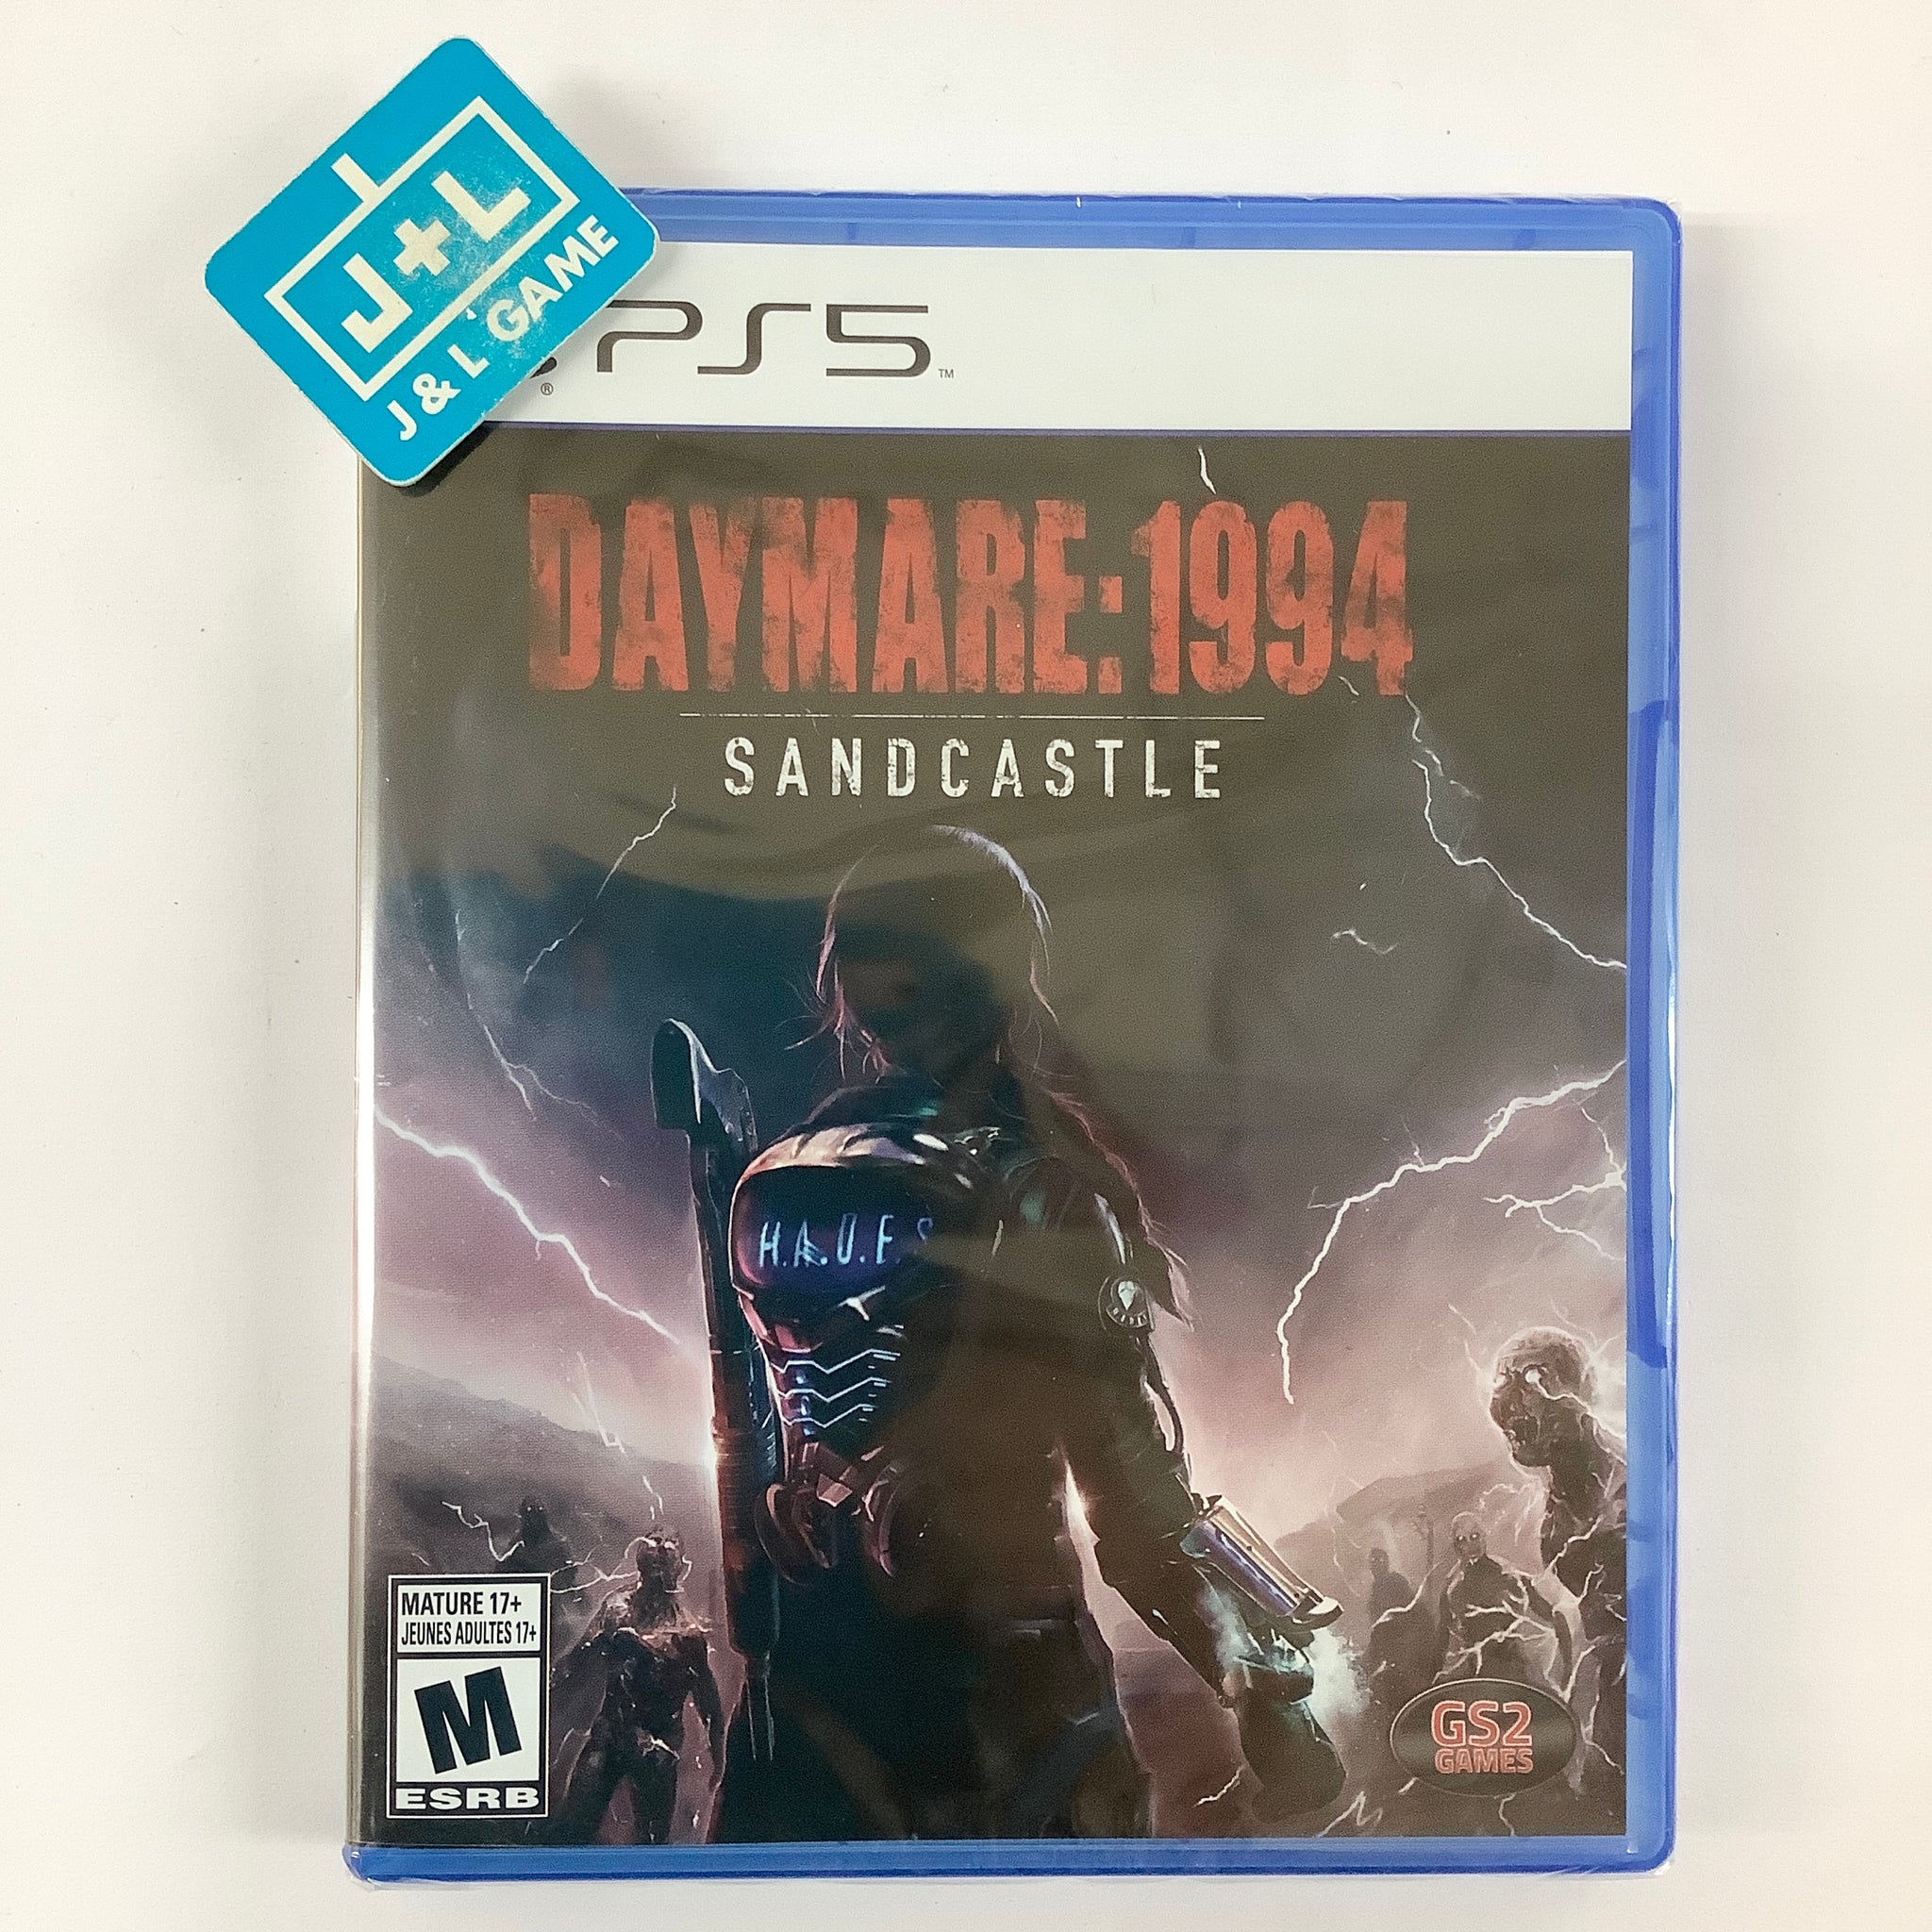 Daymare: 1994 - Sandcastle - (PS5) PlayStation 5 Video Games GS2 Games   